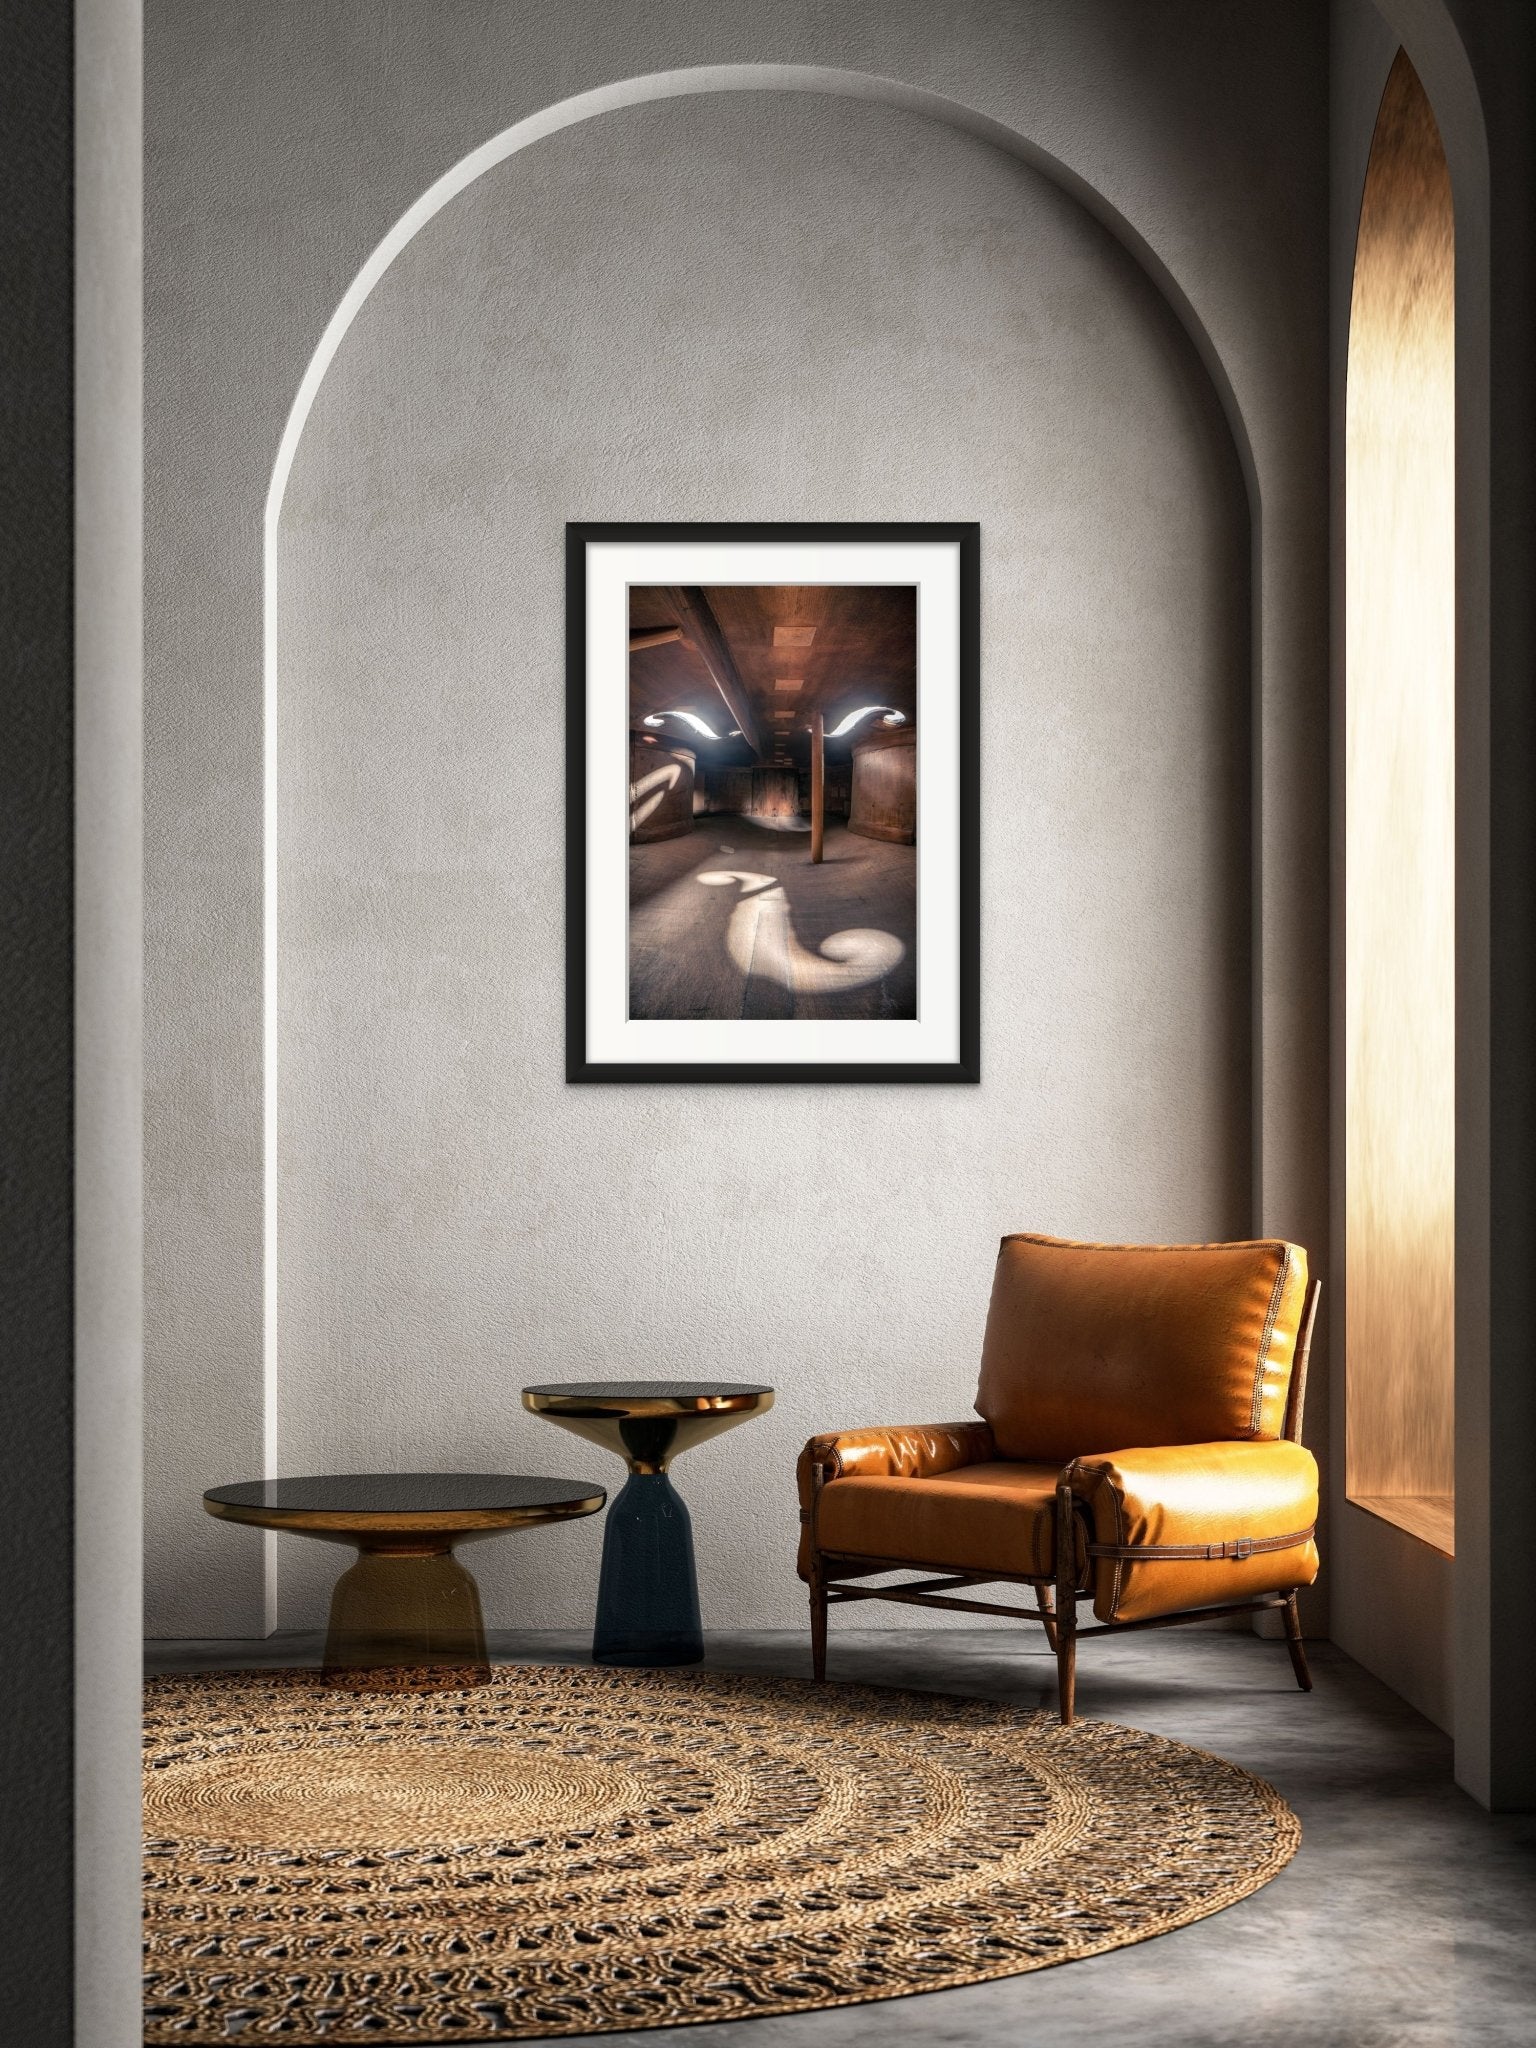 Photo of Lockey Hill Cello Circa 1780, Portrait. Signed Limited Edition Museum Quality Print. - Giclée Museum Quality Print - Architecture In Music